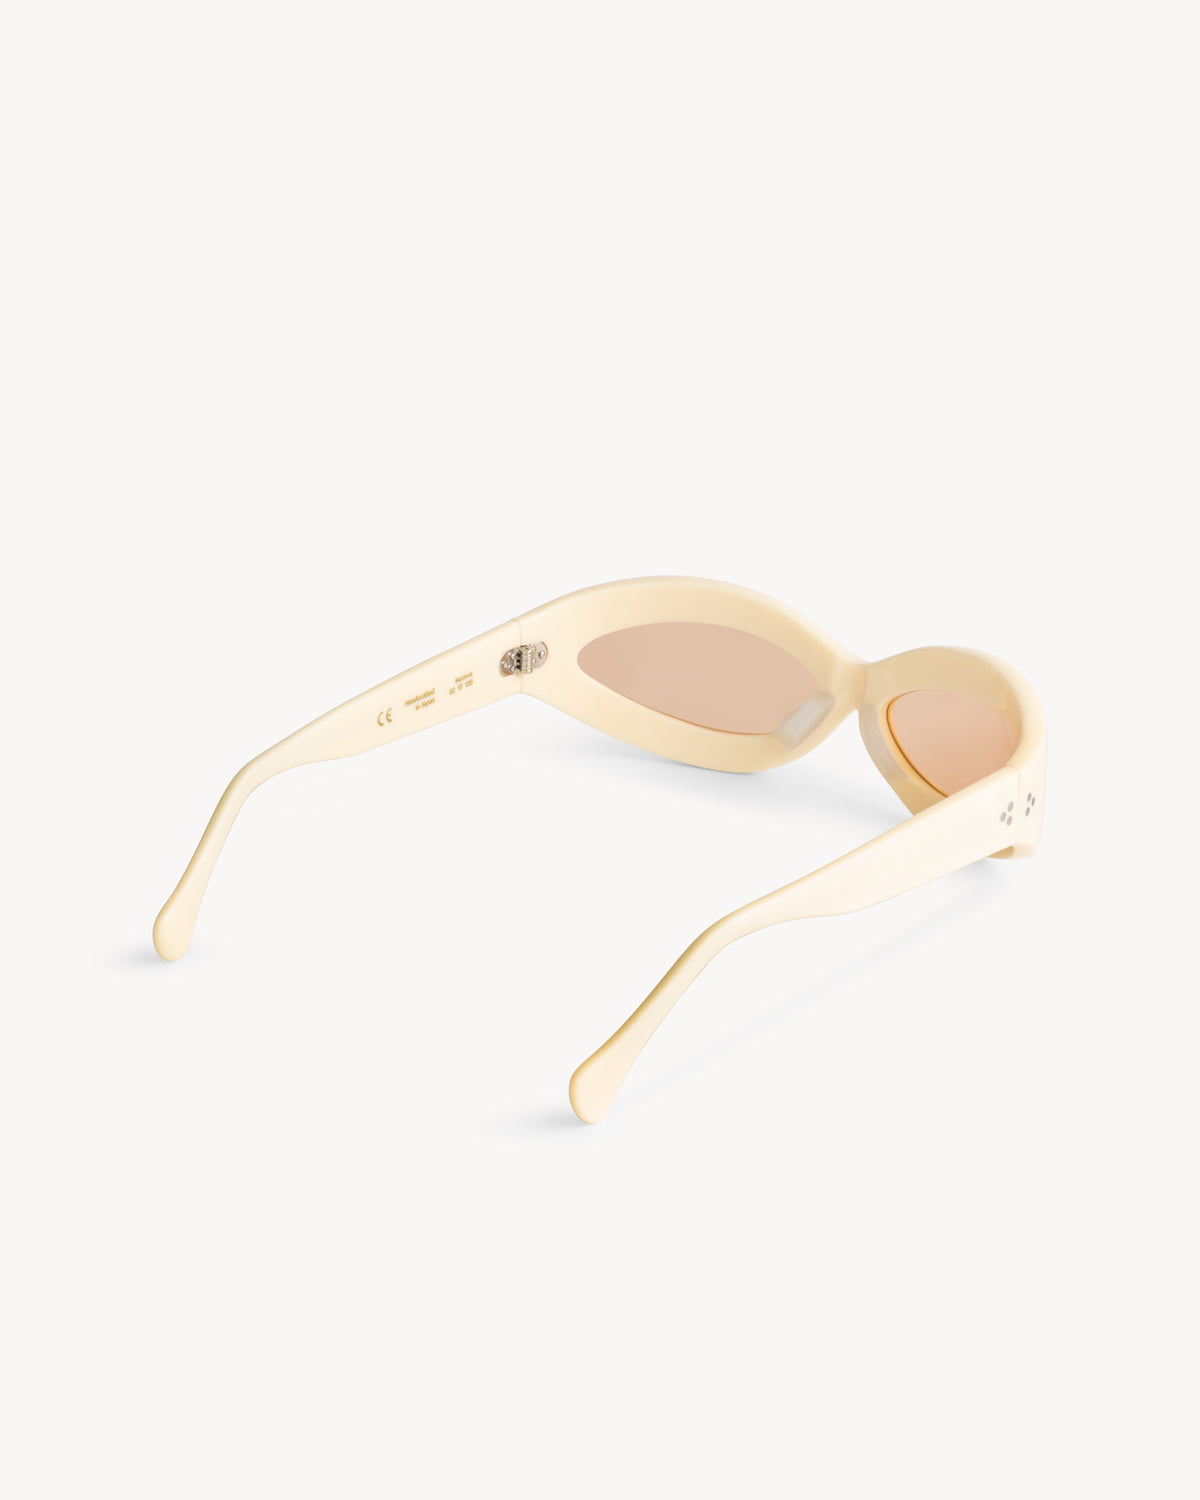 Port Tanger Summa Sunglasses in Parchment Acetate and Amber Lenses 3